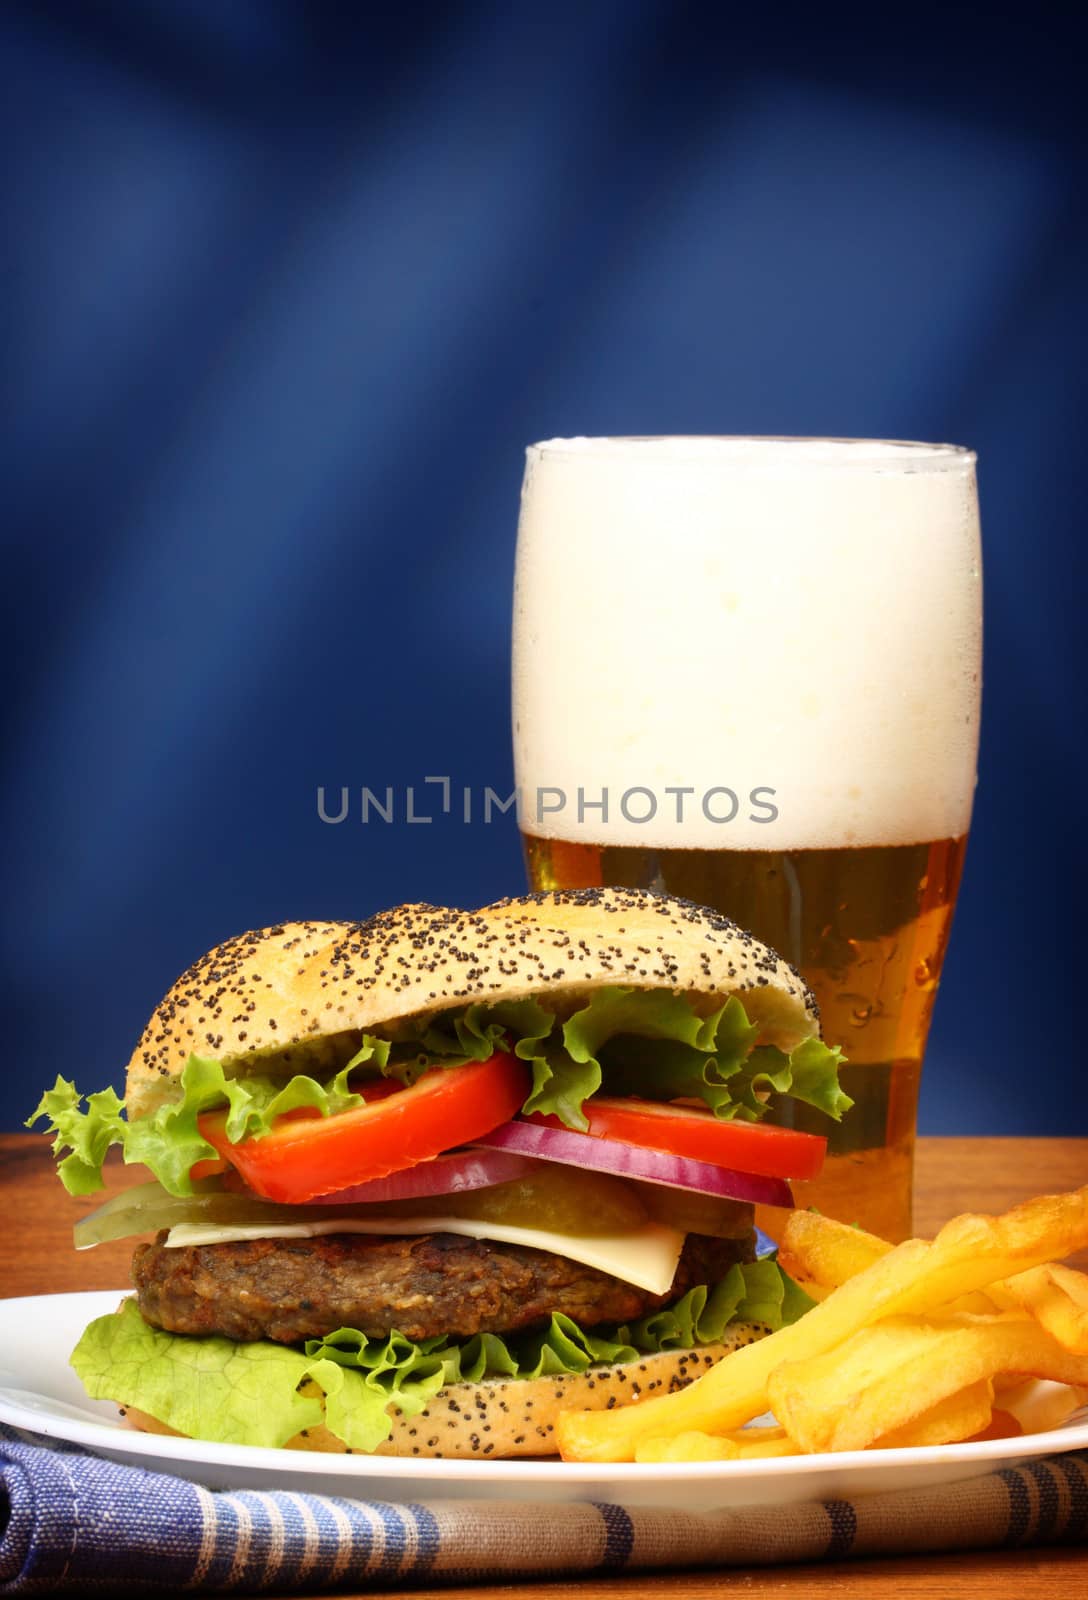  burger, french fries and beer by alexkosev